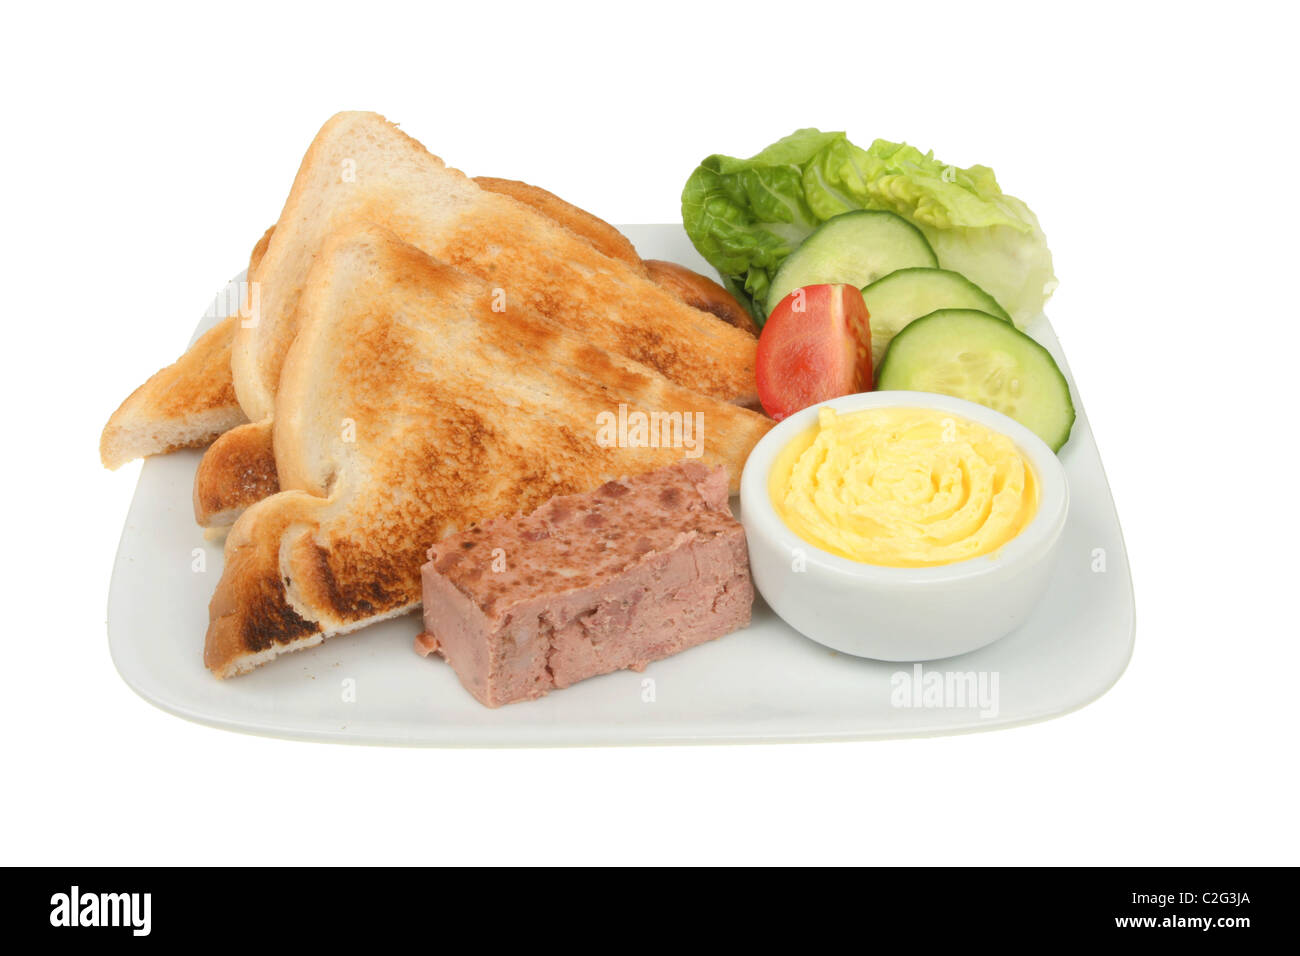 Pate,toast and salad garnish on a plate Stock Photo